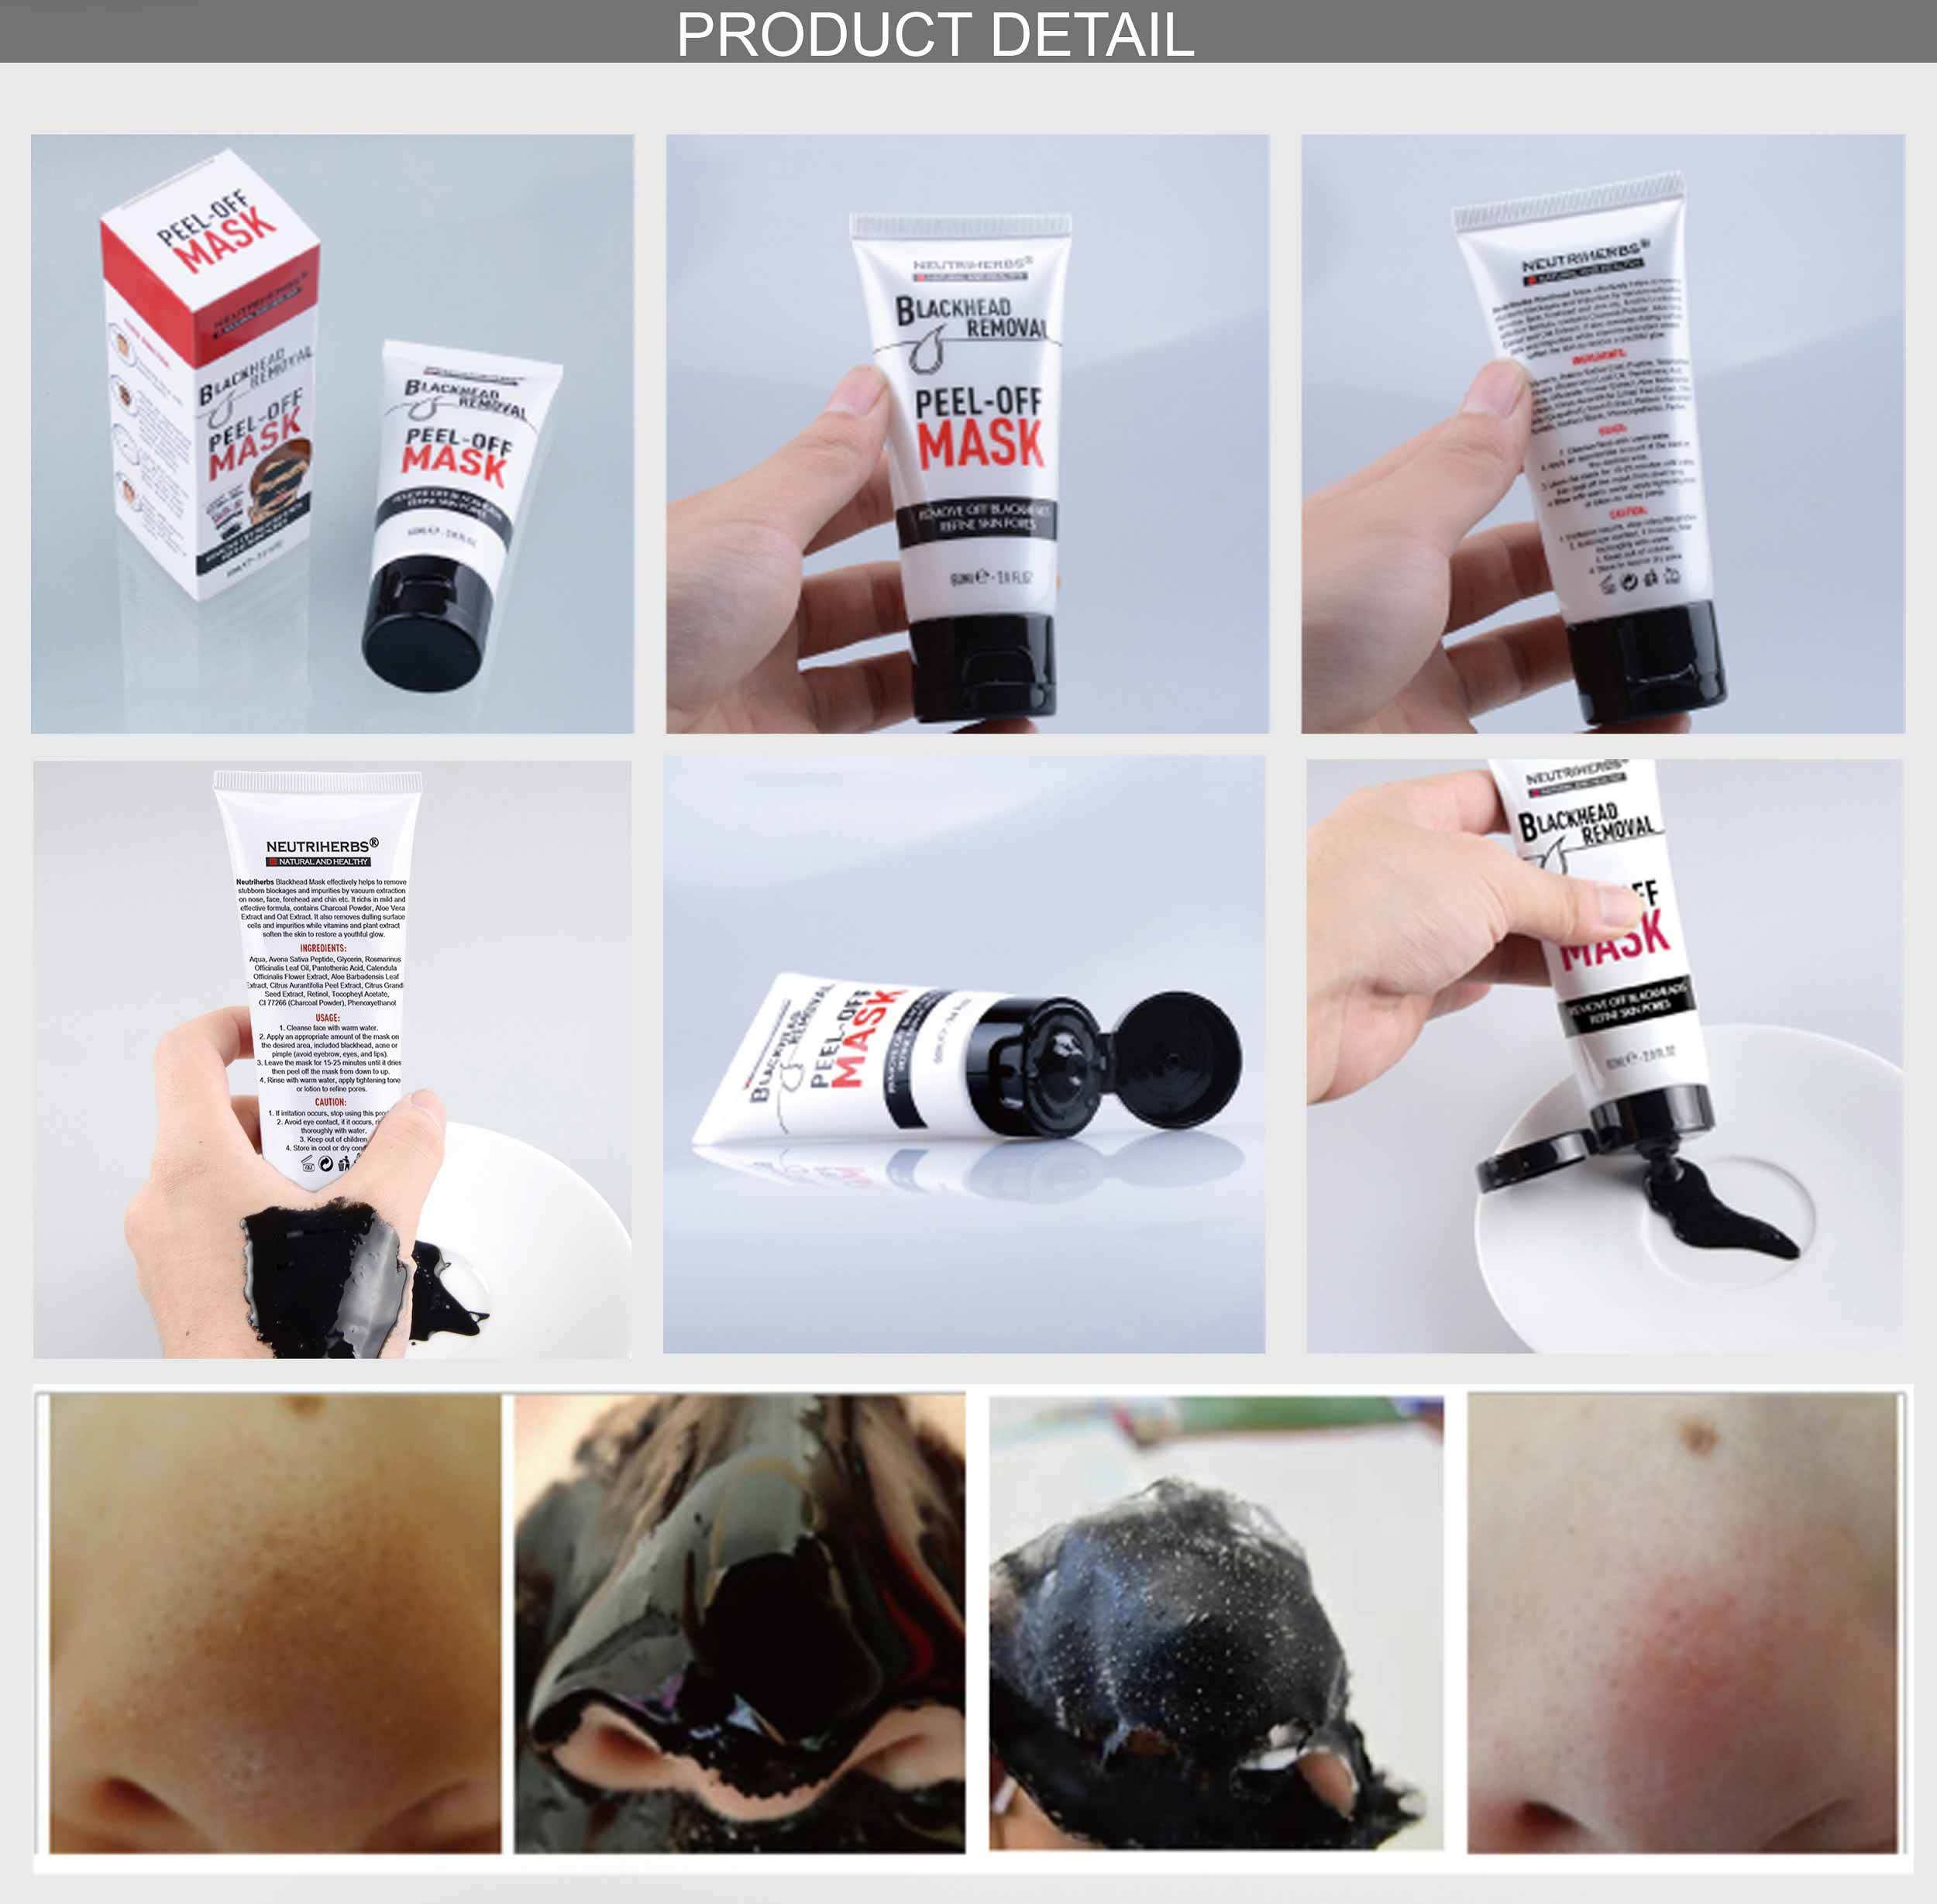 blackheads and whiteheads removal-blackhead maske-blackhead cleanser-products for blackheads